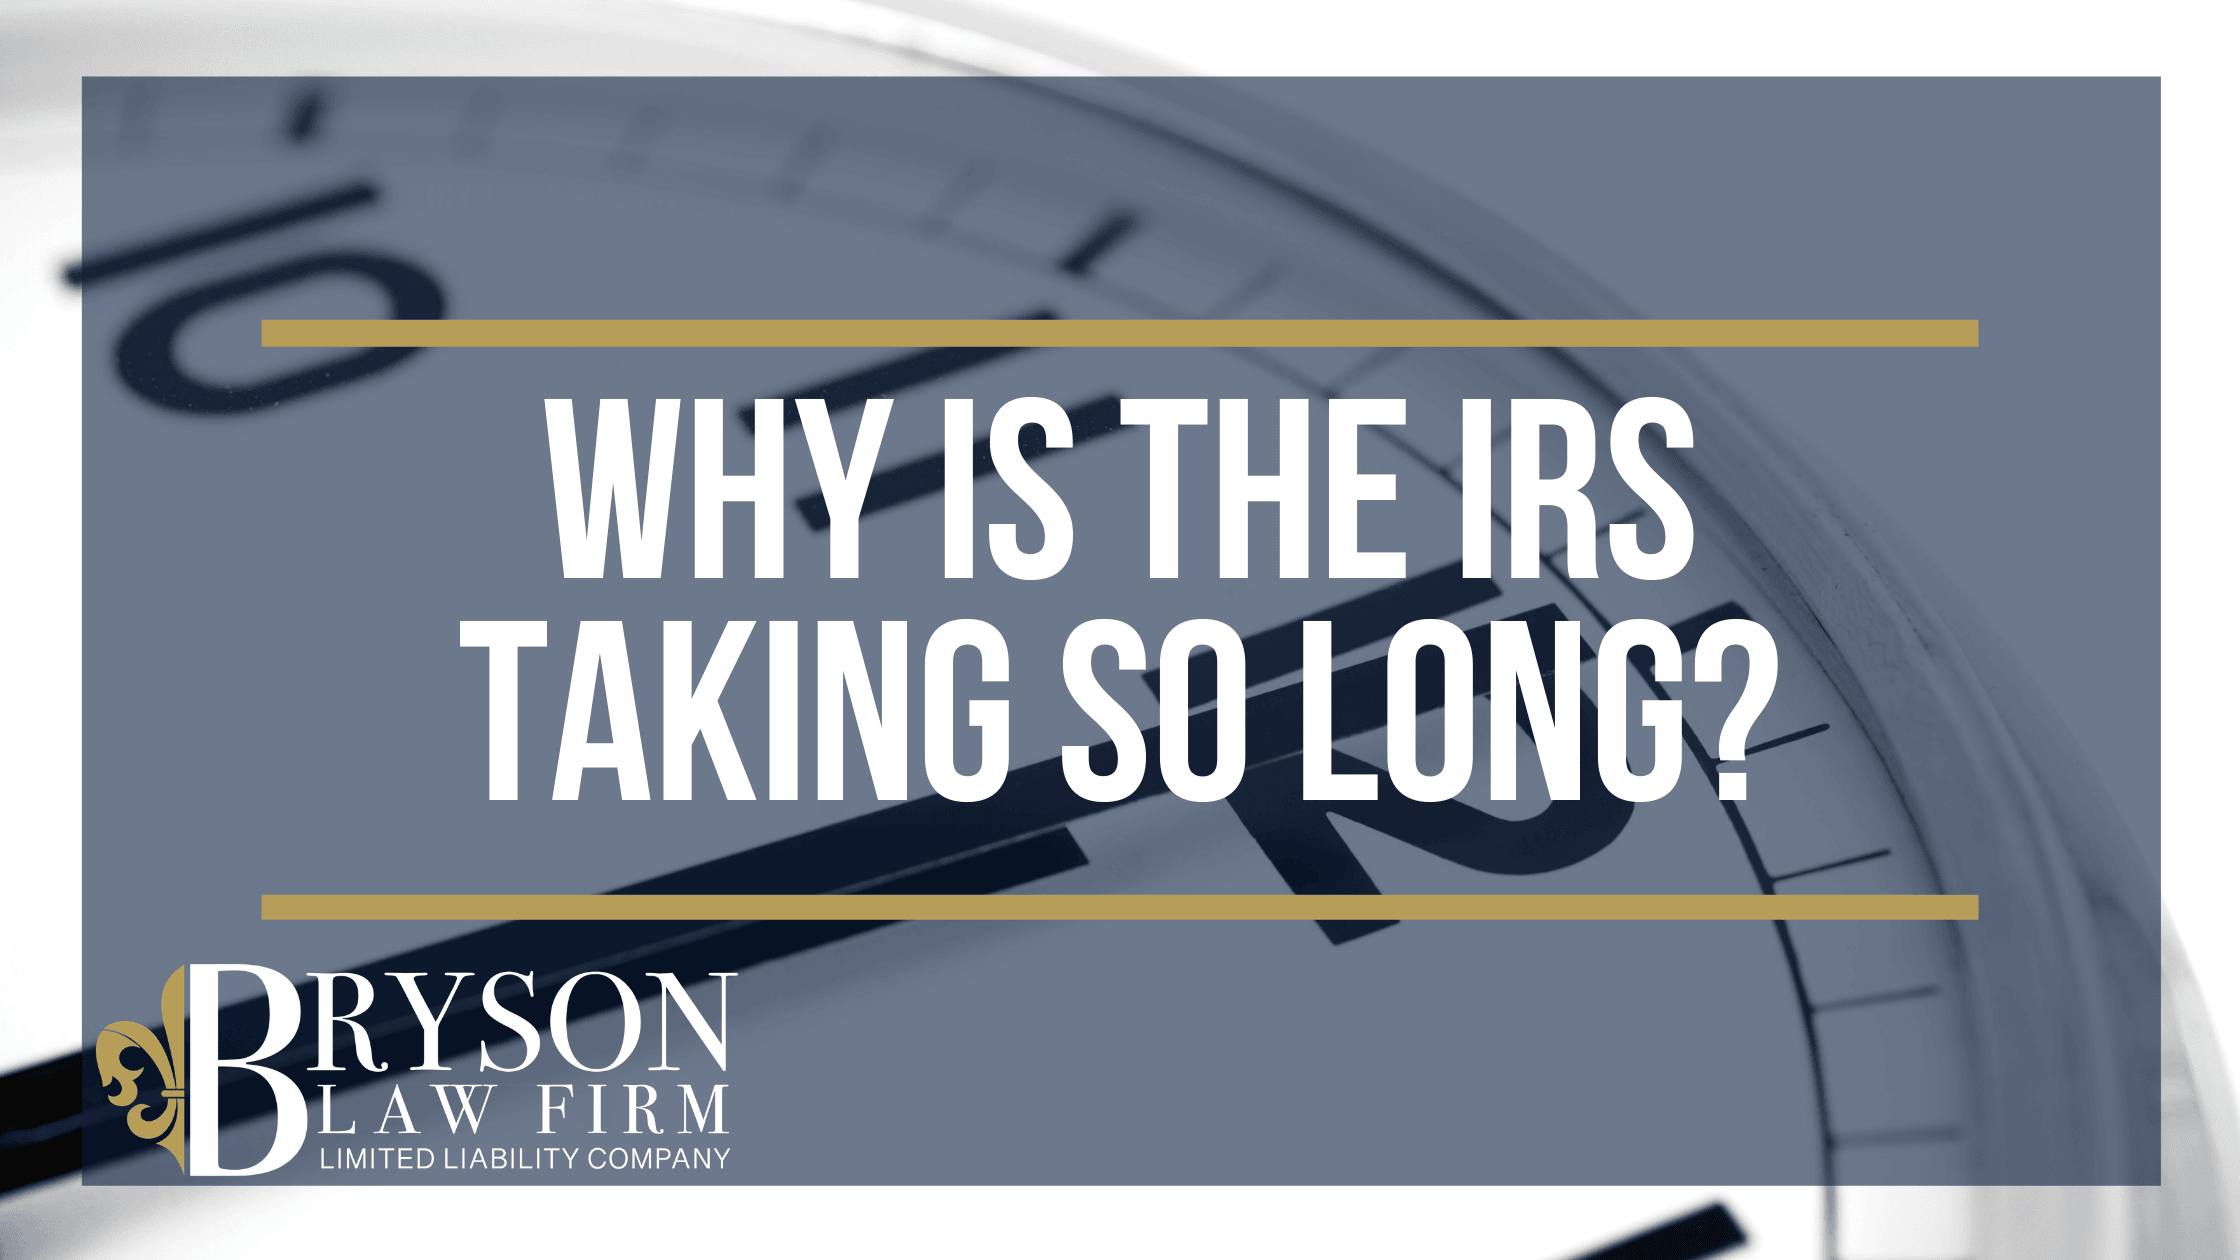 WHY IS THE IRS TAKING SO LONG?